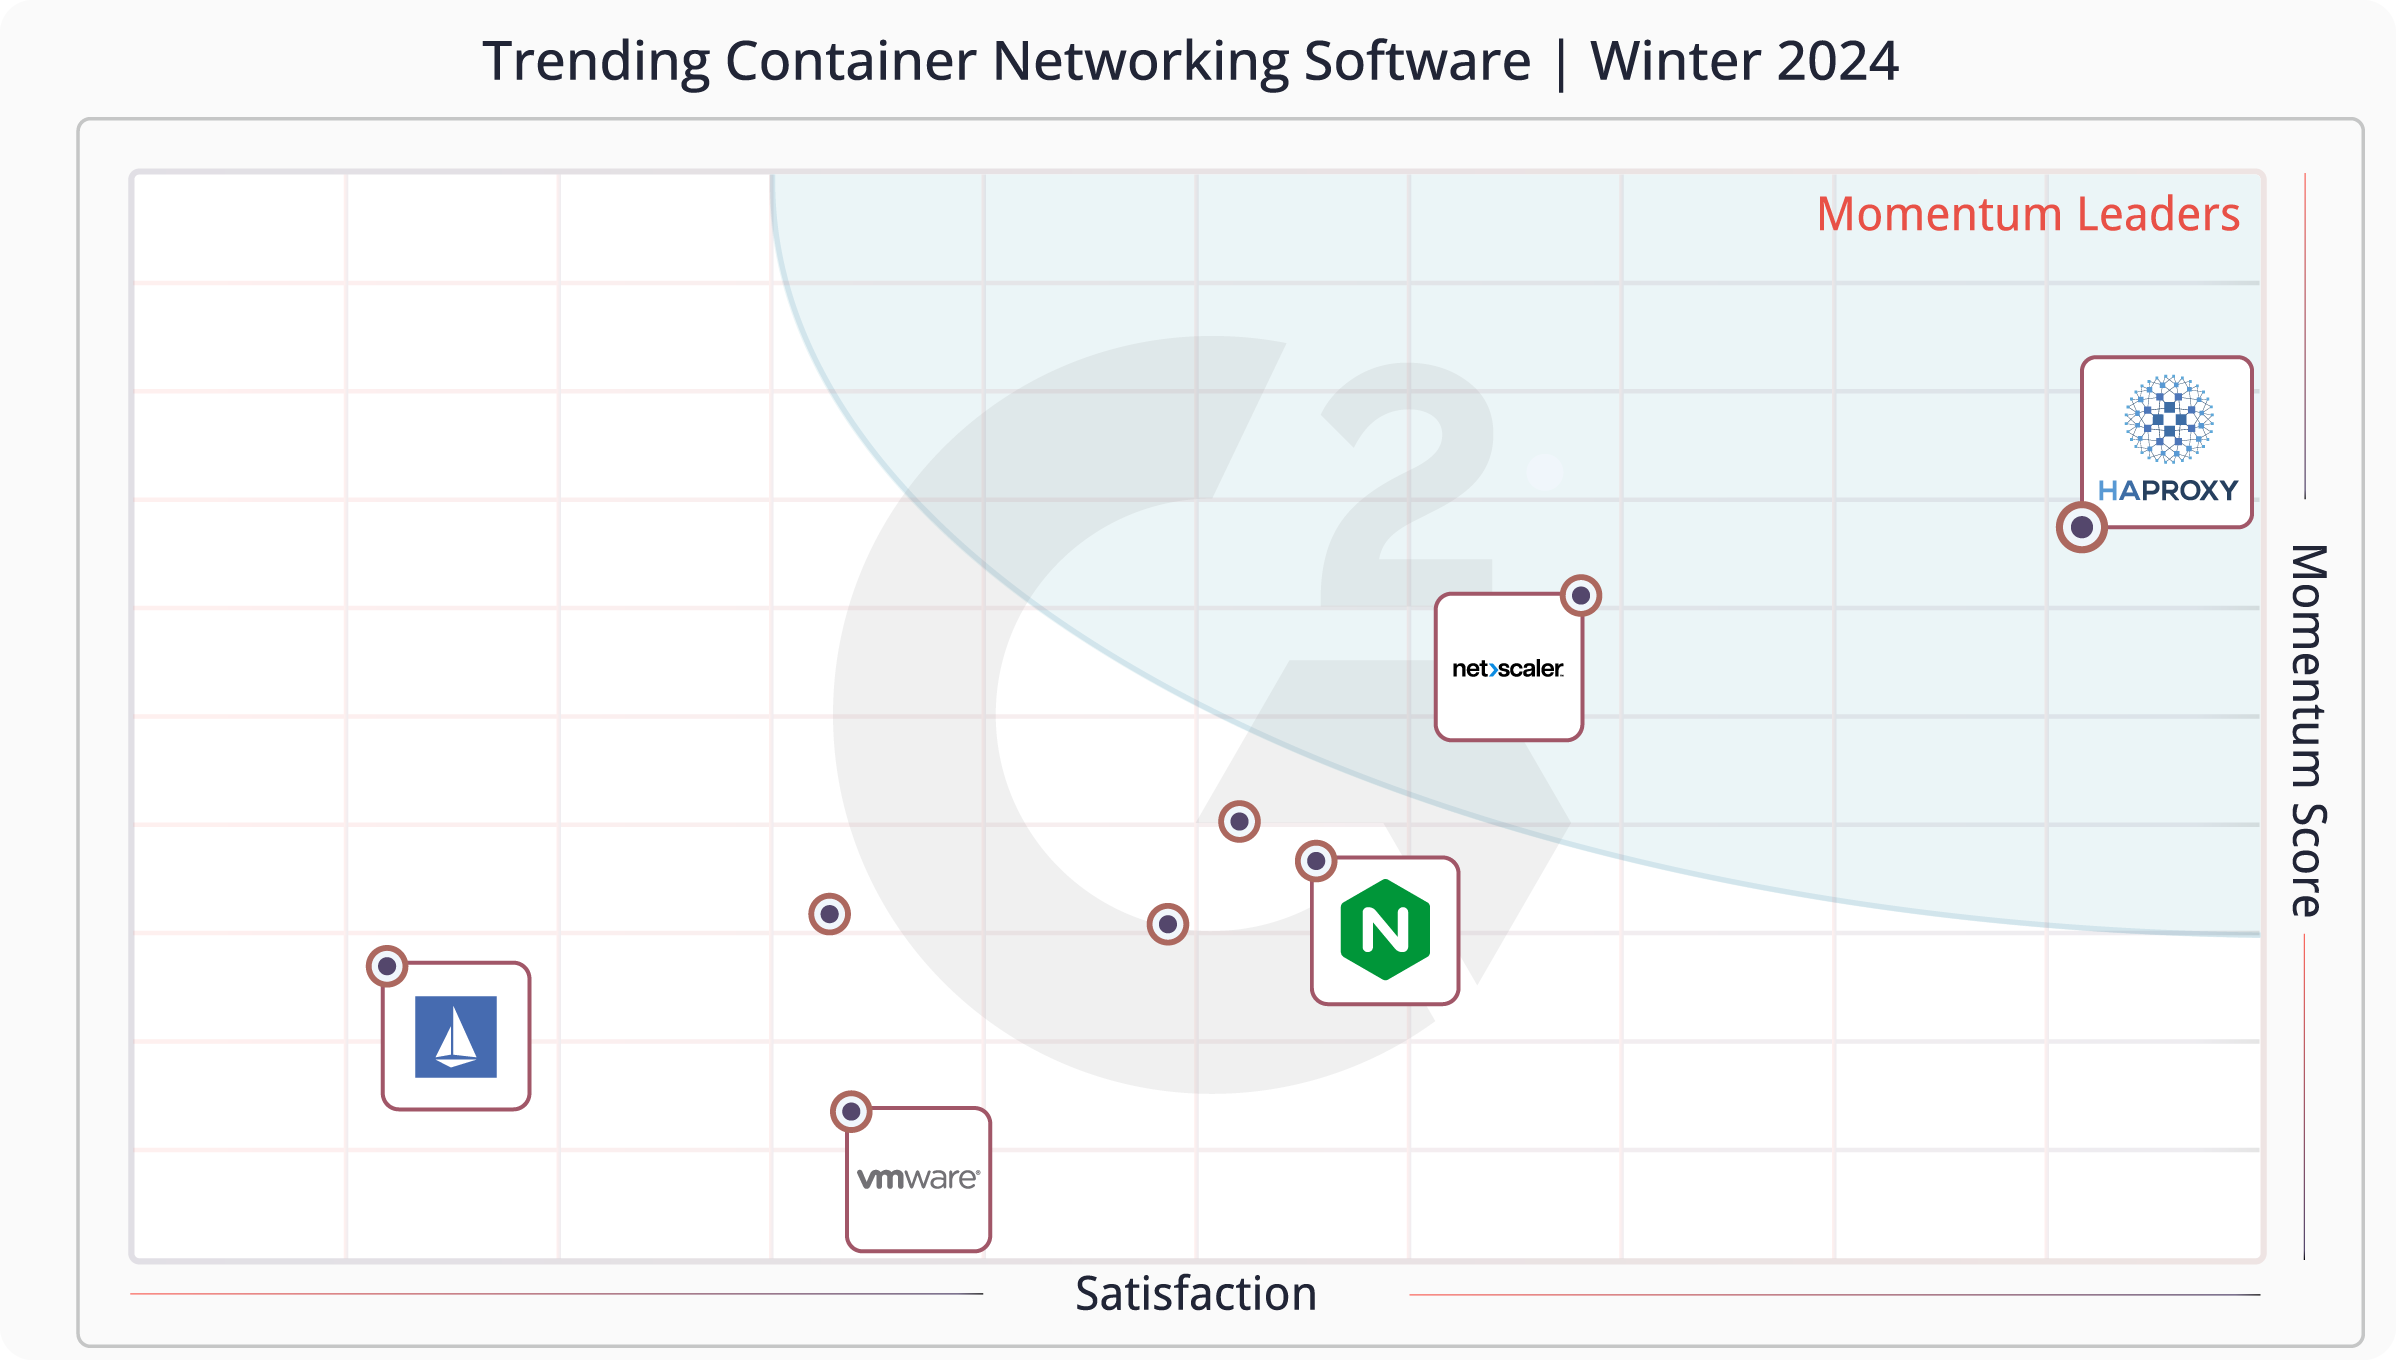 g2-review-of-haproxy-container-networking-software-grid-winter-2024_4x